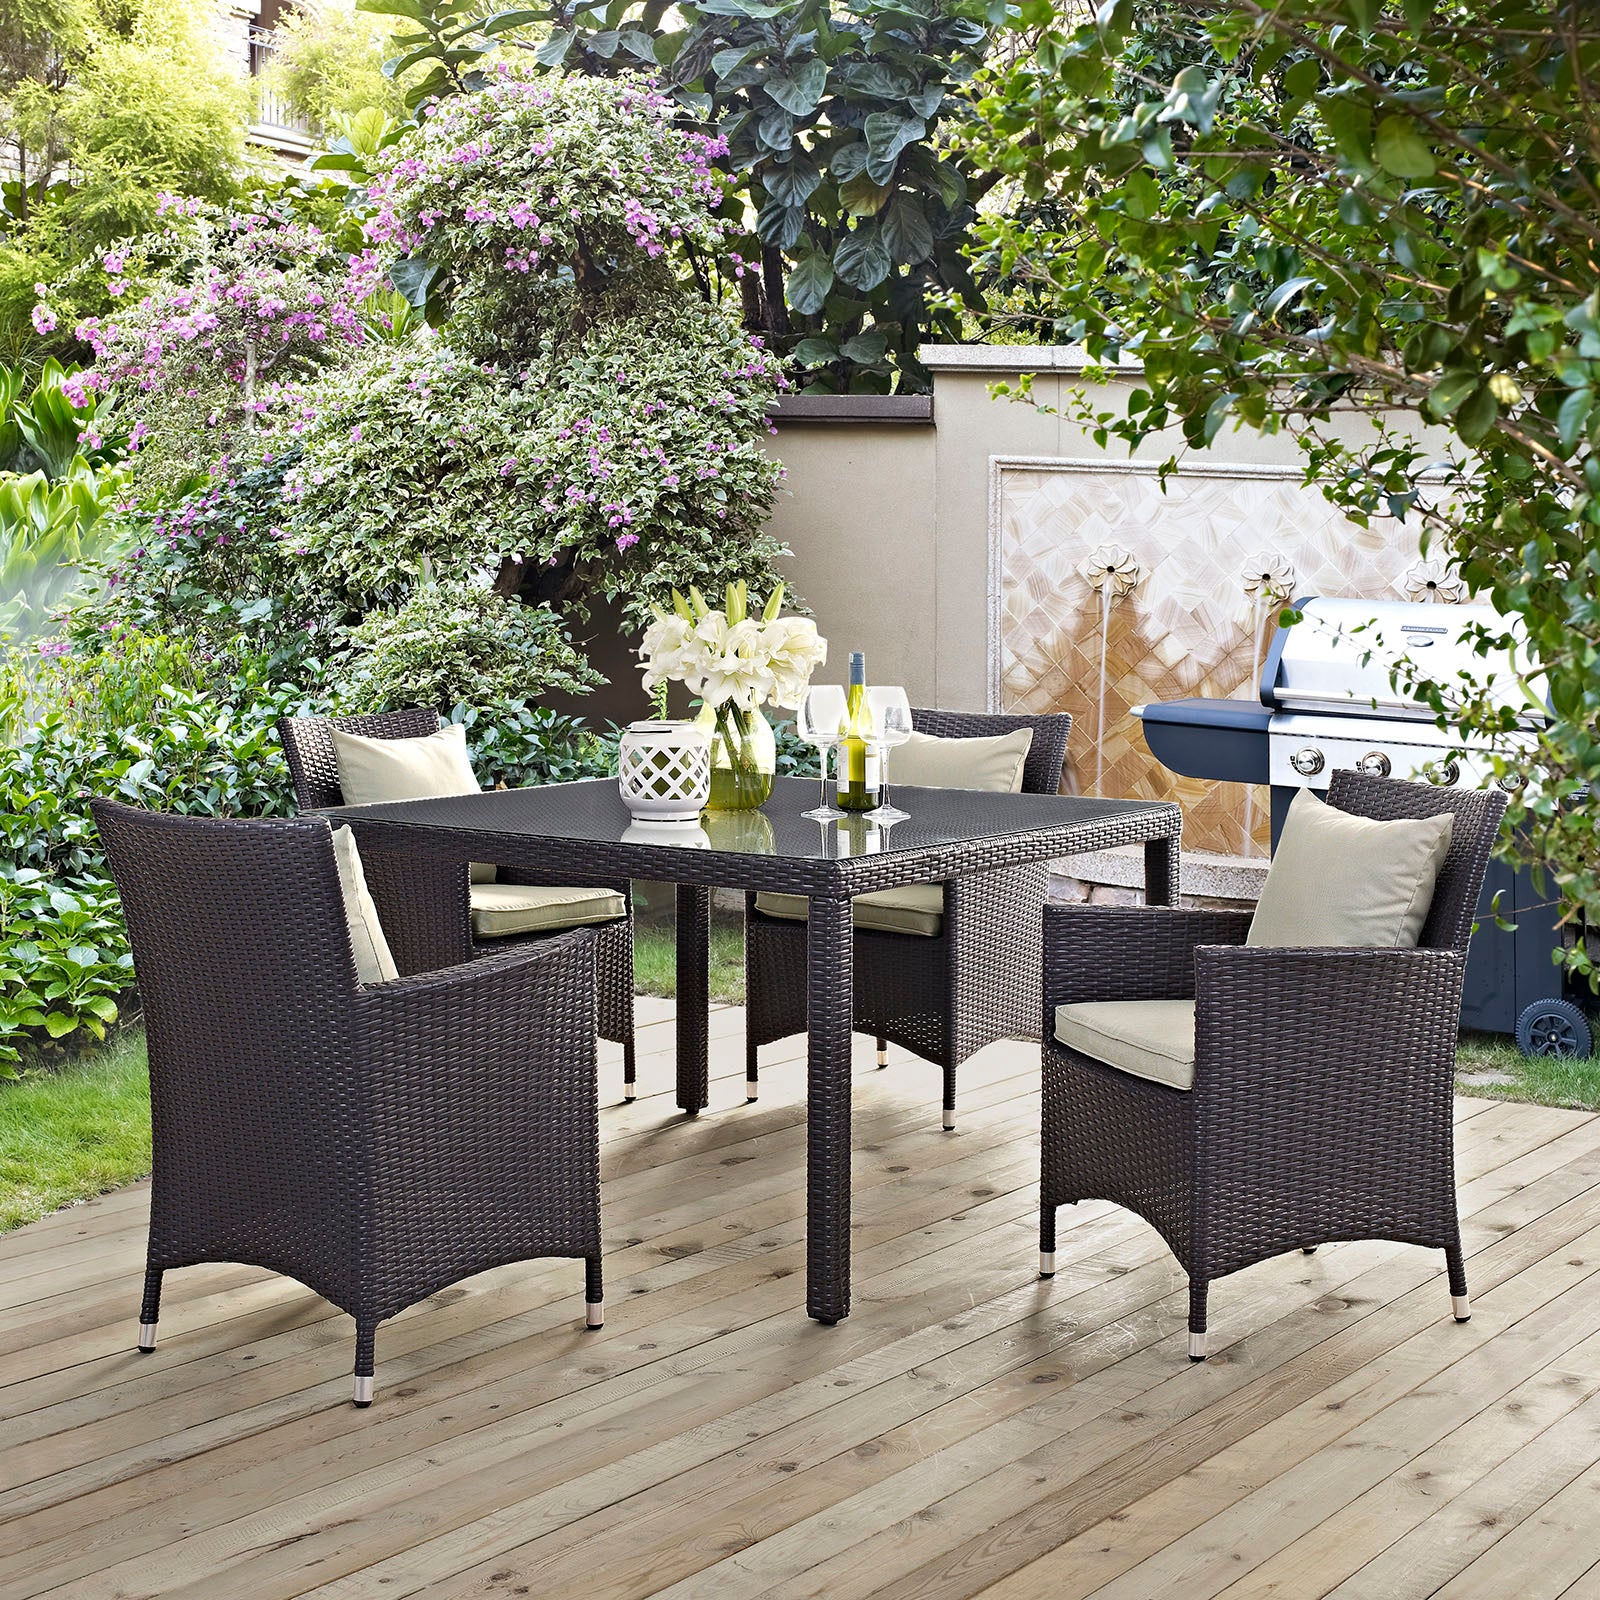 Convene 5 Piece Outdoor Patio Dining Set - East Shore Modern Home Furnishings